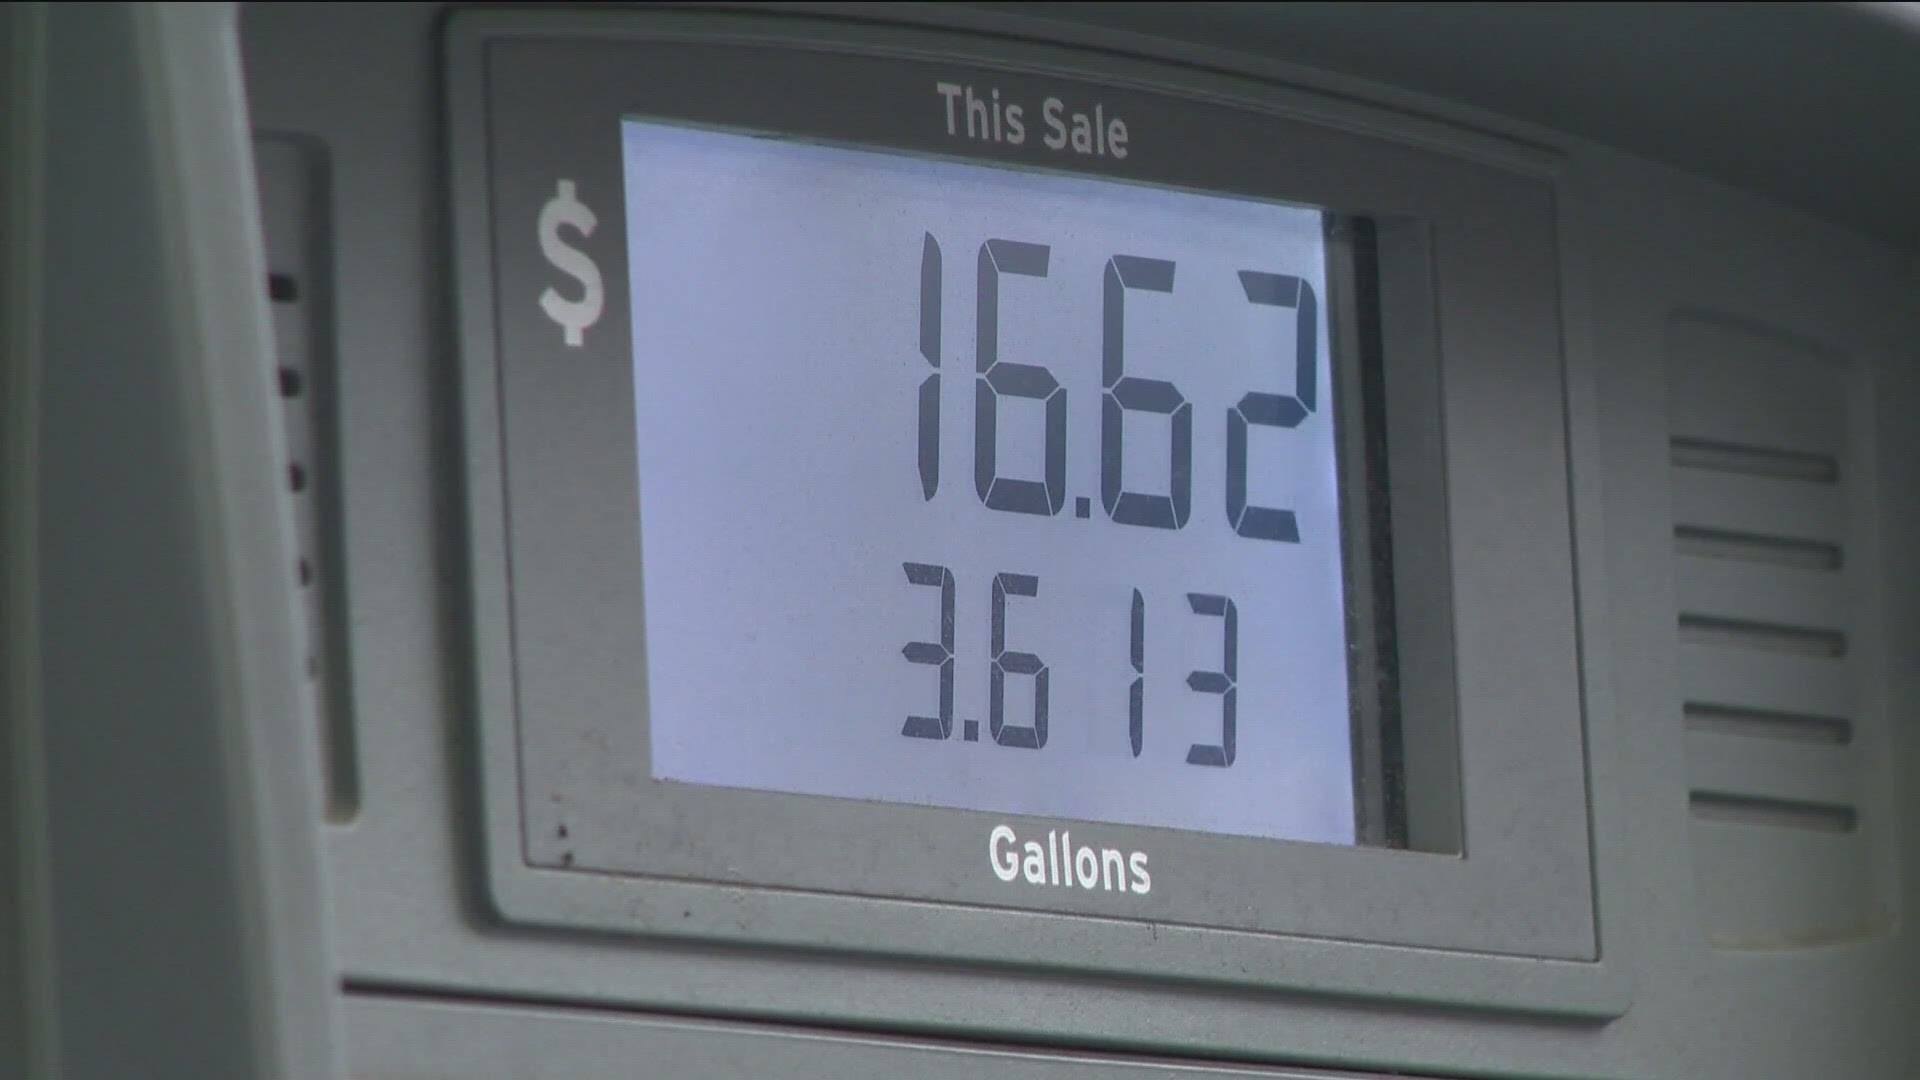 Gas prices dipped 5 cents compared to last week.